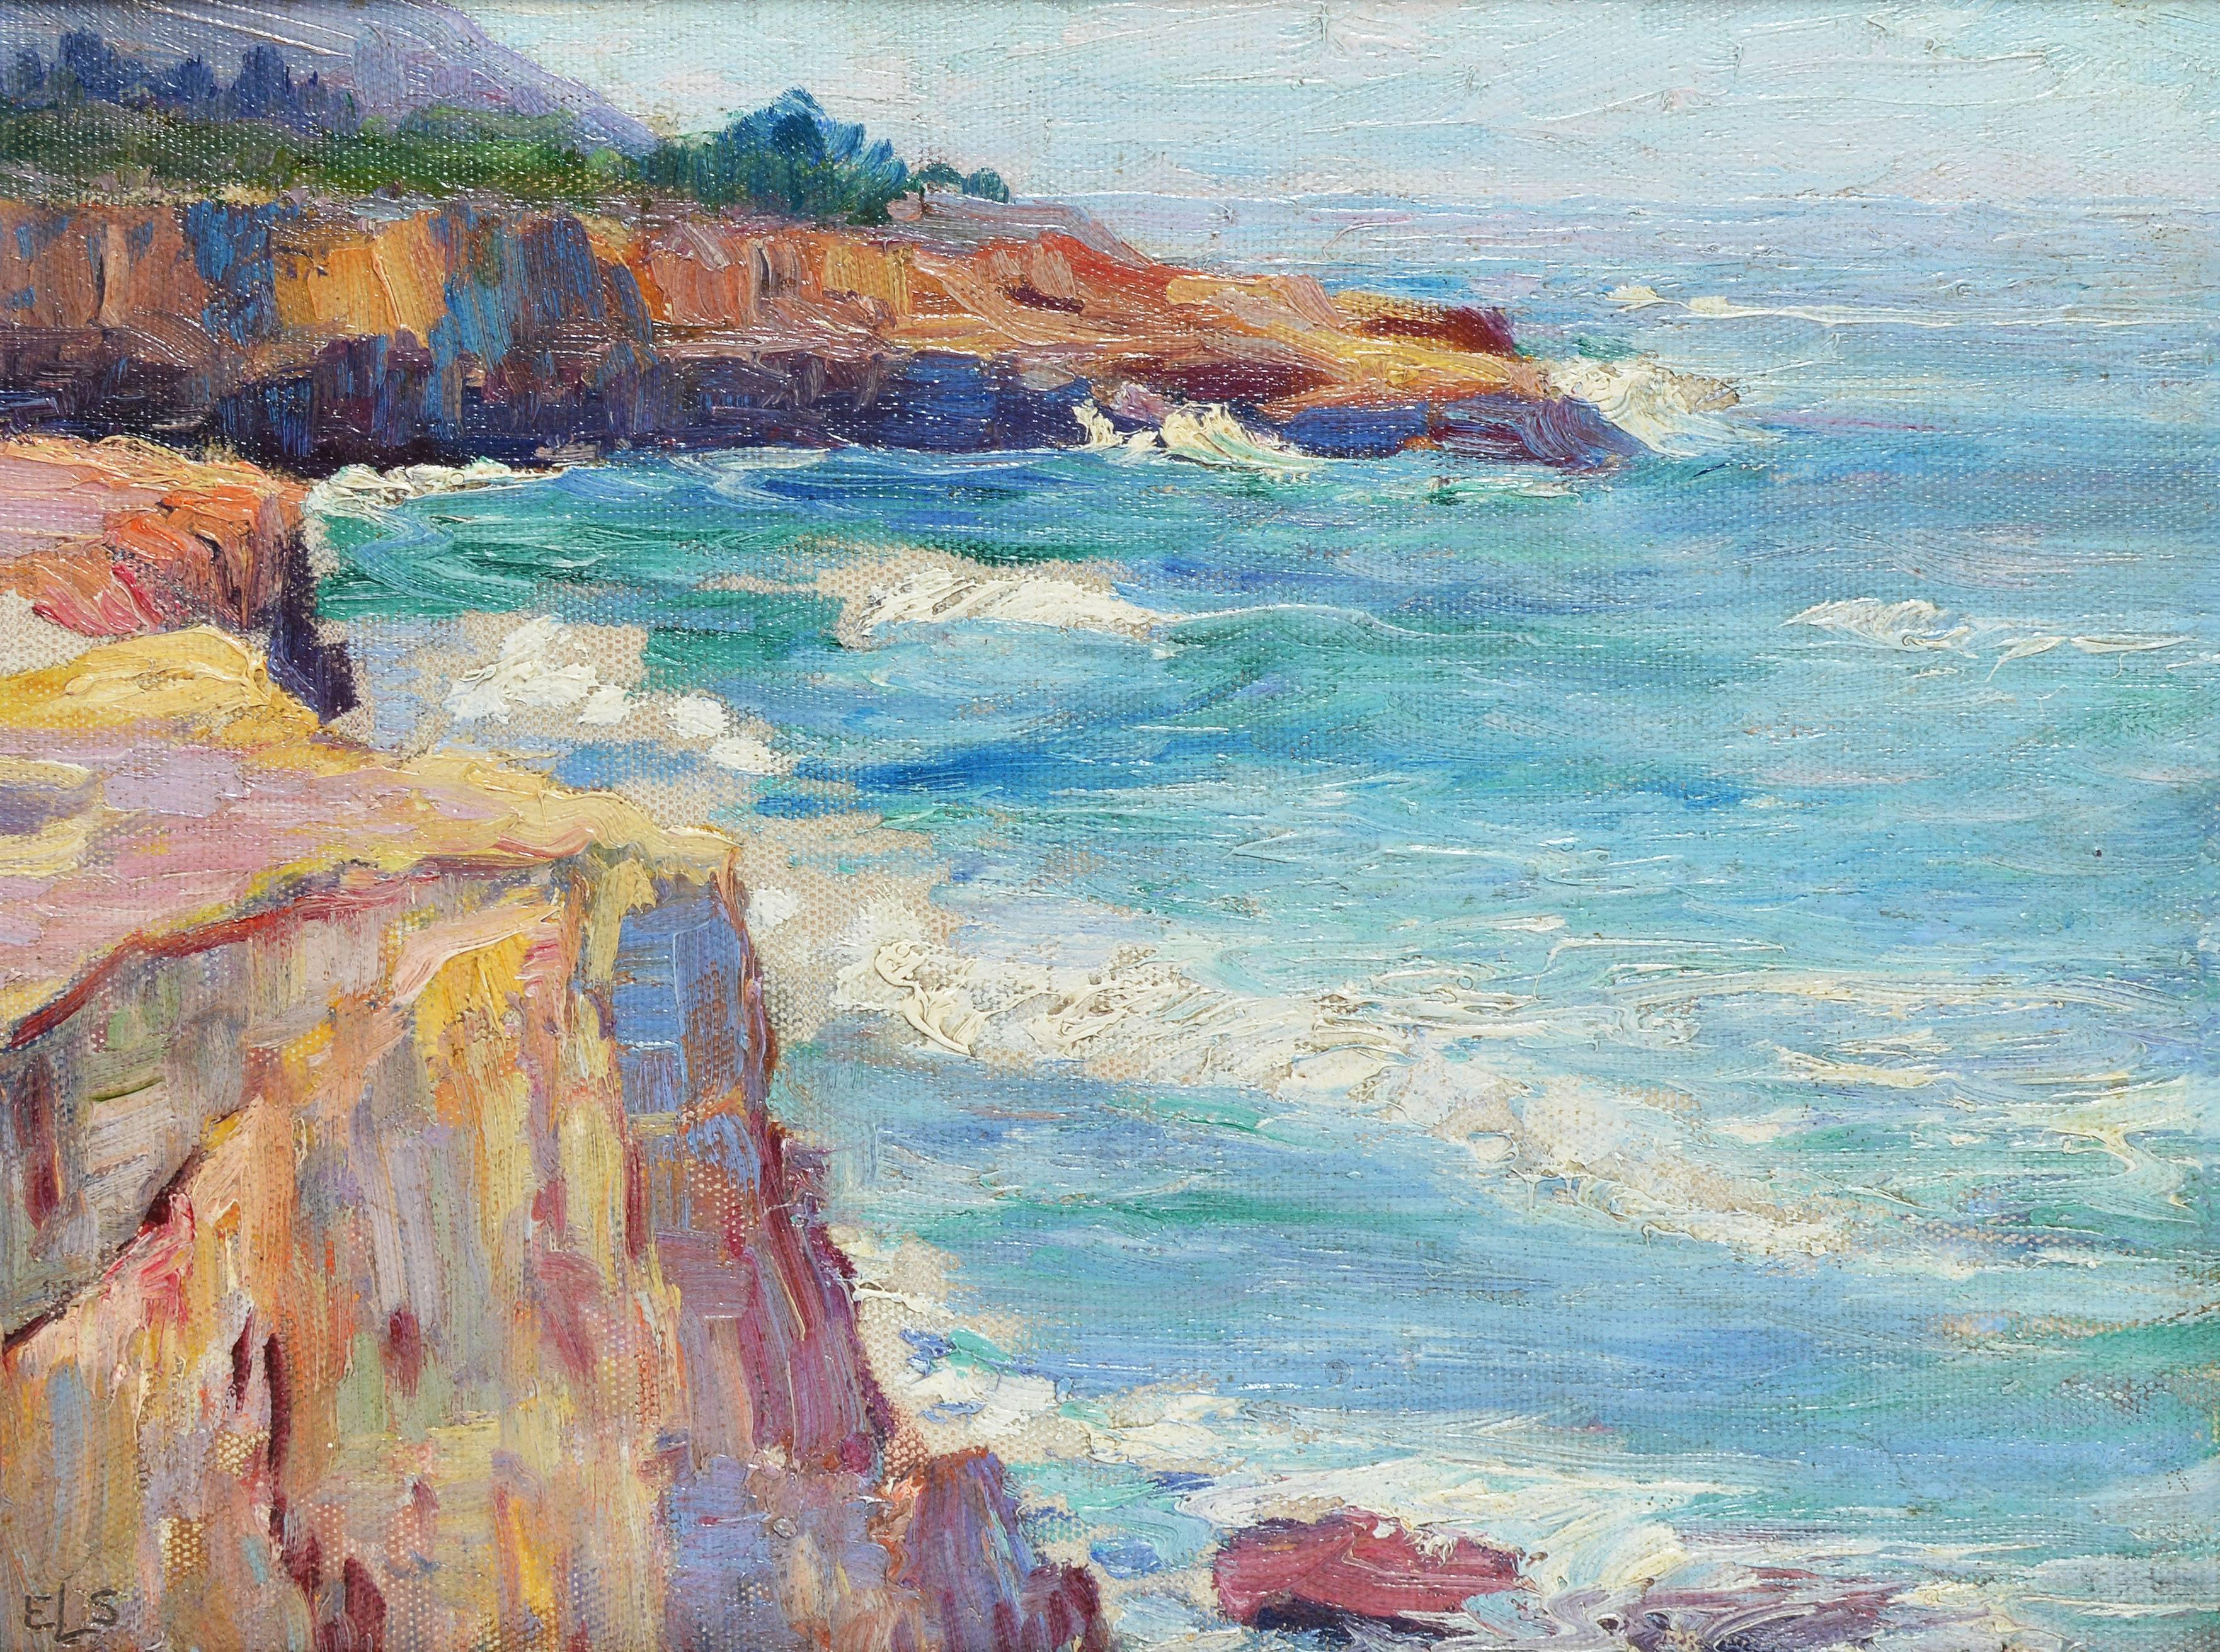 Crashing Waves at Point Loma Cliffs San Diego California - Impressionist Painting by Unknown